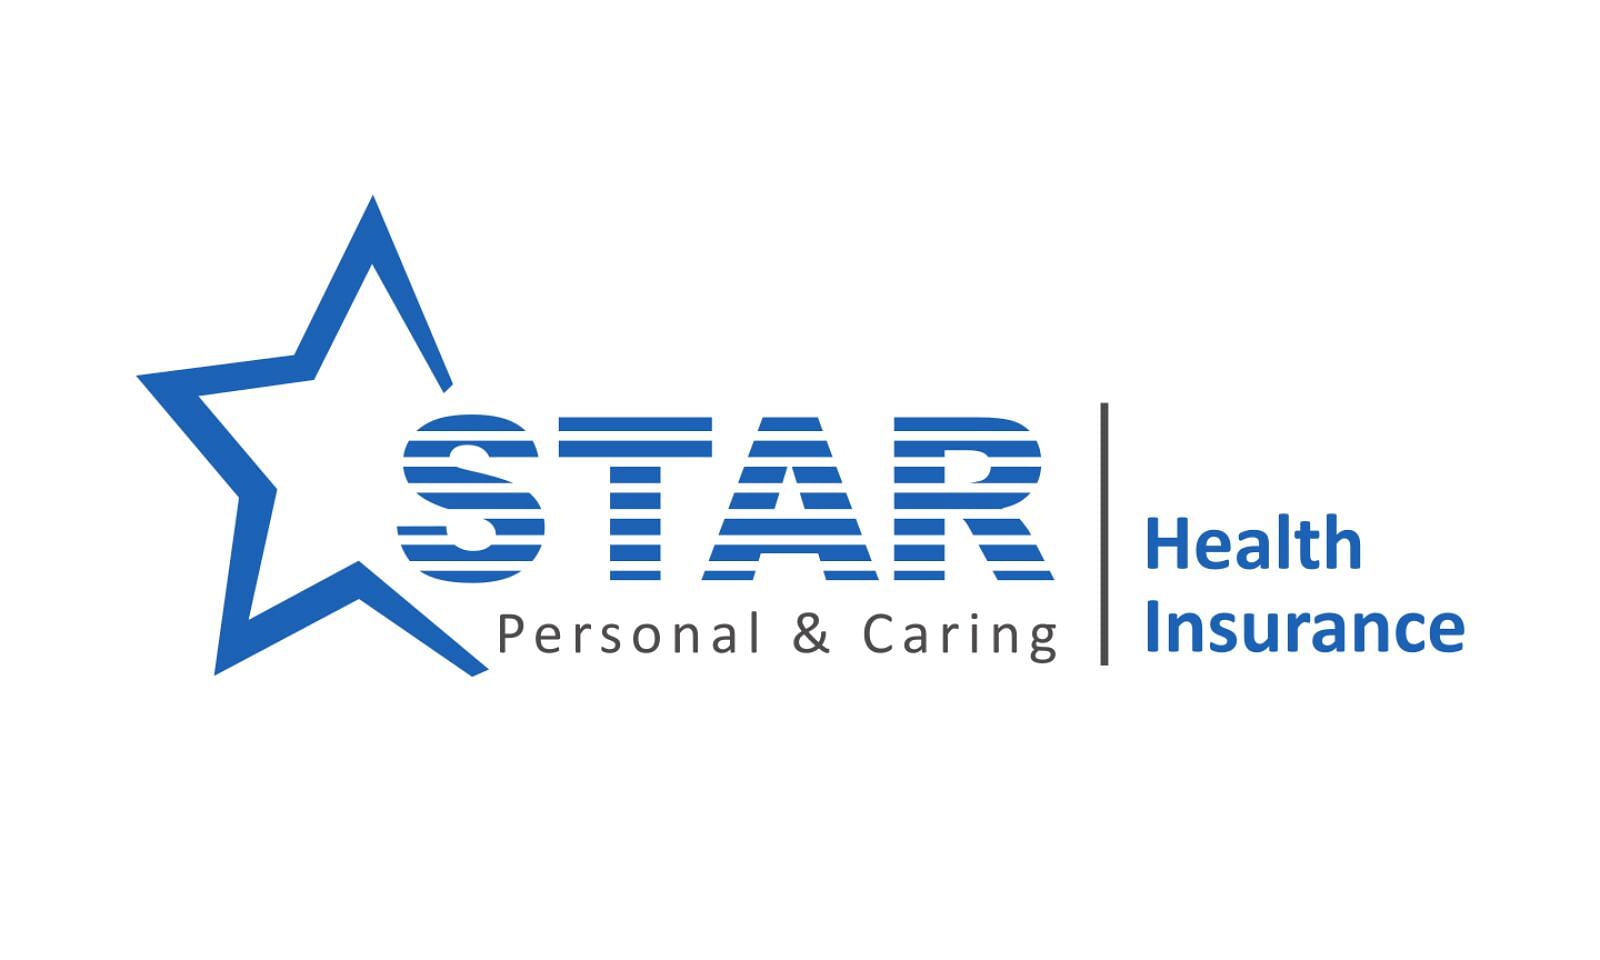 Star Health Launches WhatsApp Services to Provide Easy Policy and Claims Access To Customers